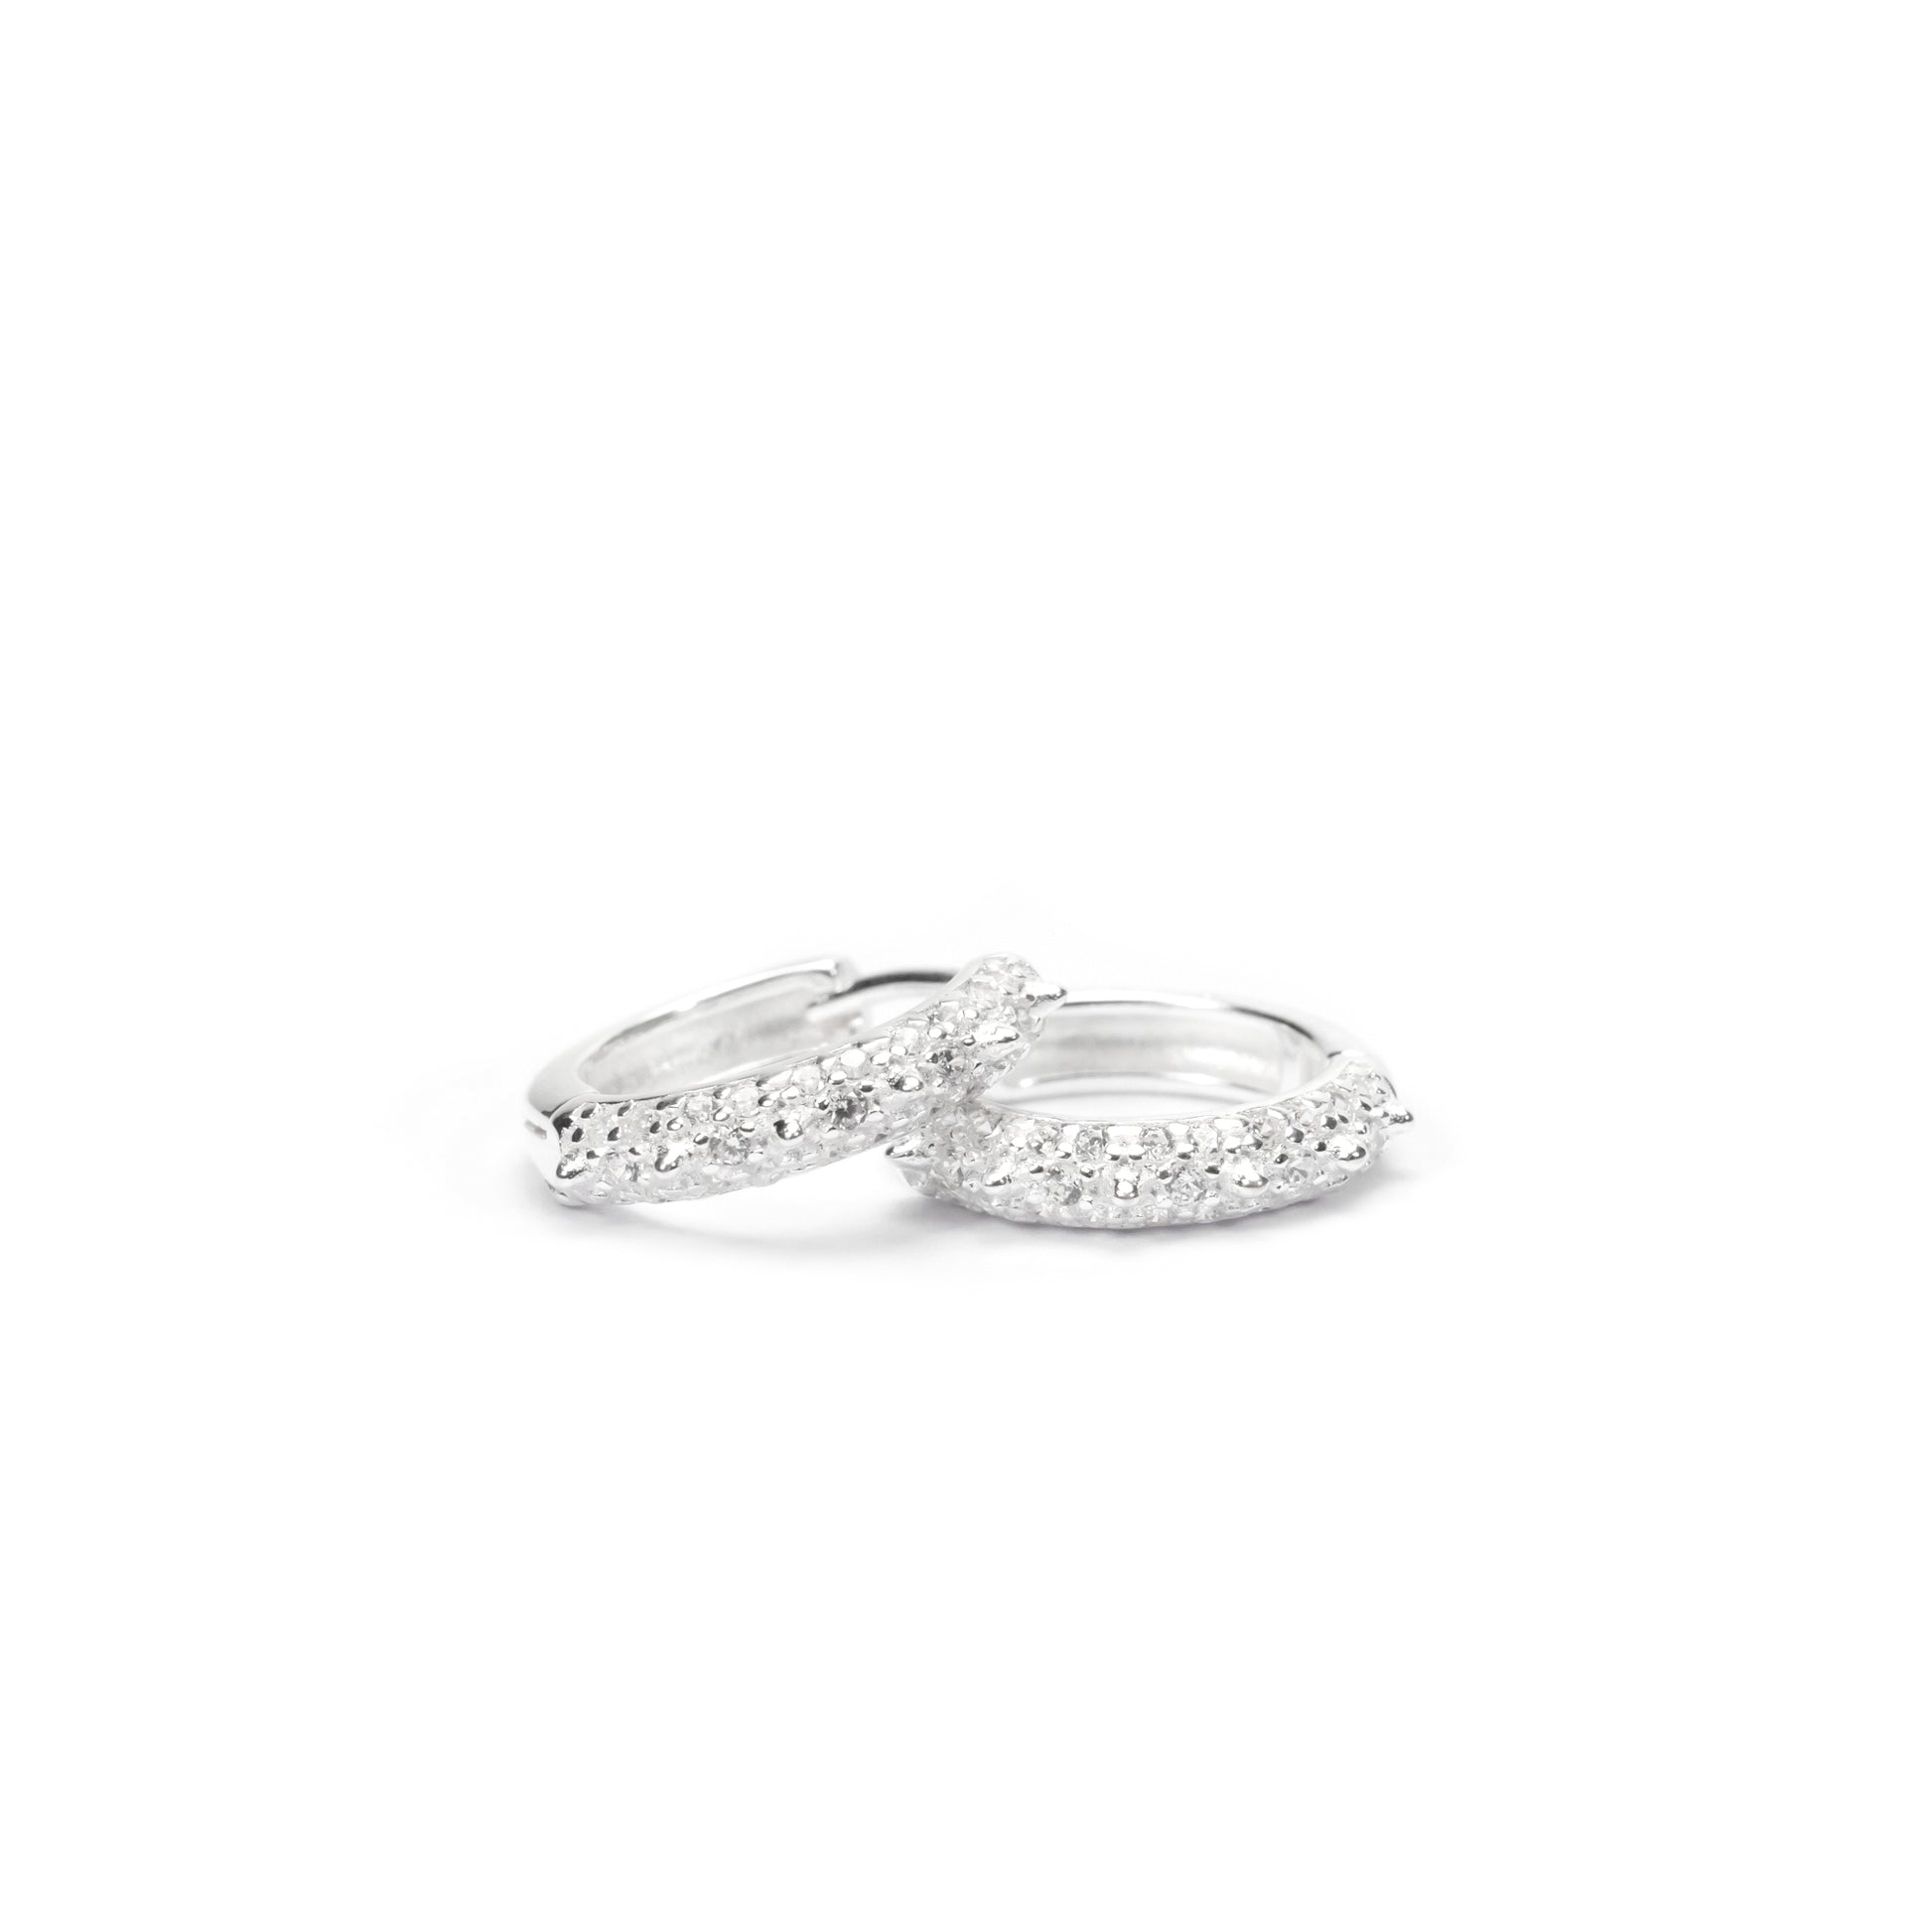 sterling silver Classic Diamond Hoops Earrings in front view